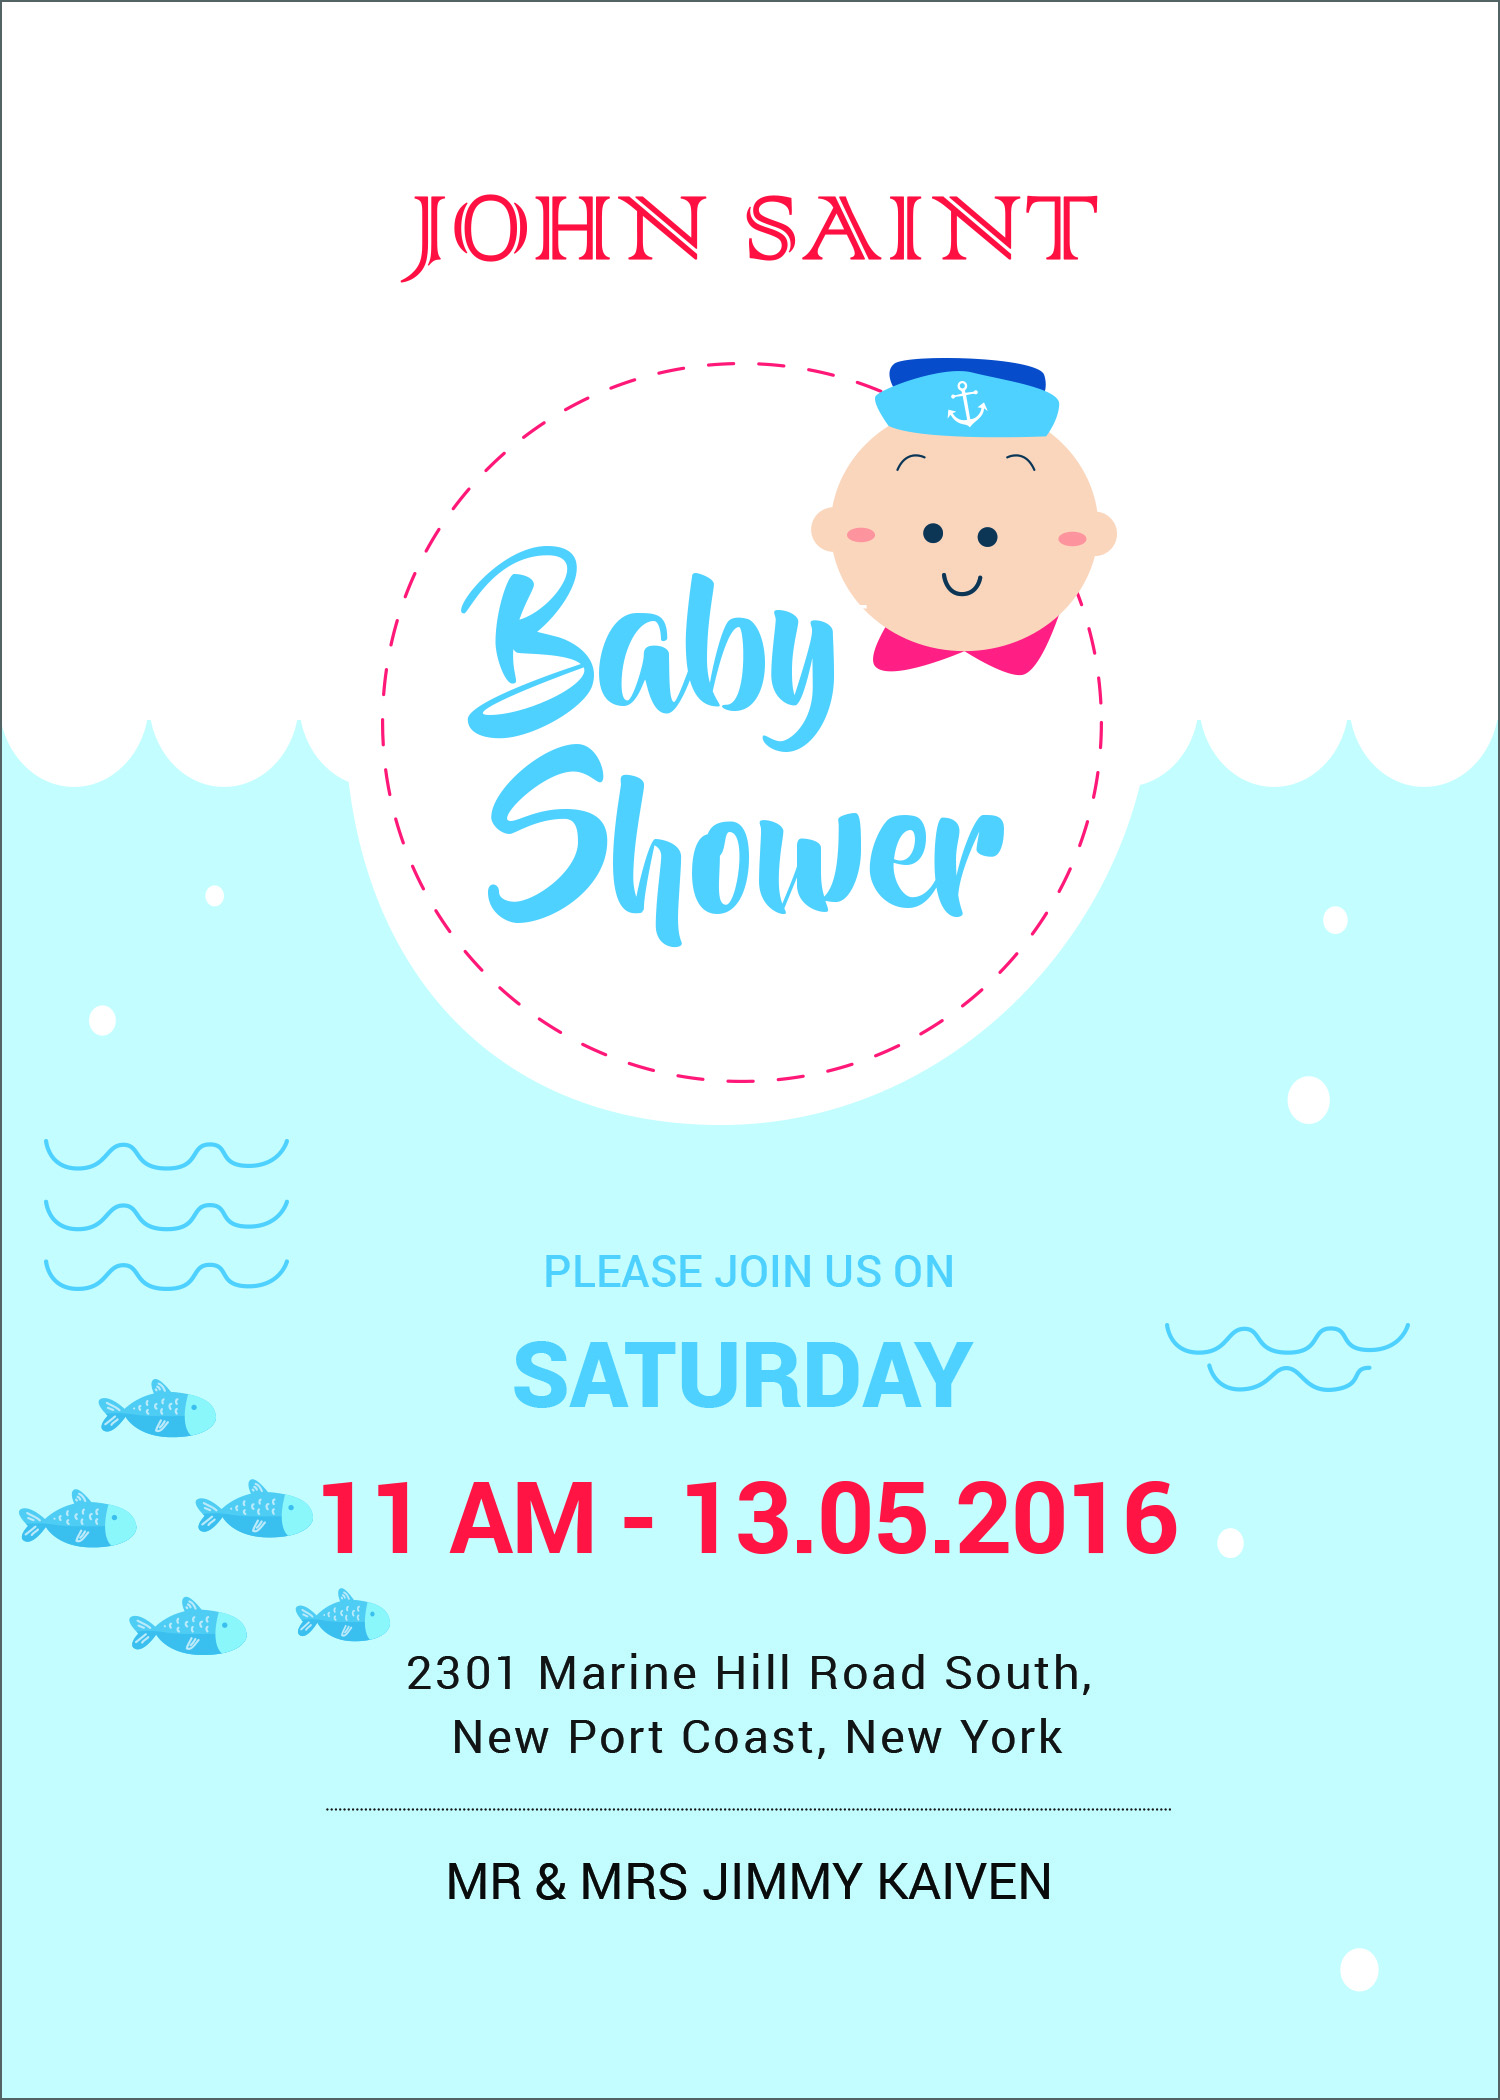 coed-baby-shower-invitation-templates-outlets-save-63-jlcatj-gob-mx